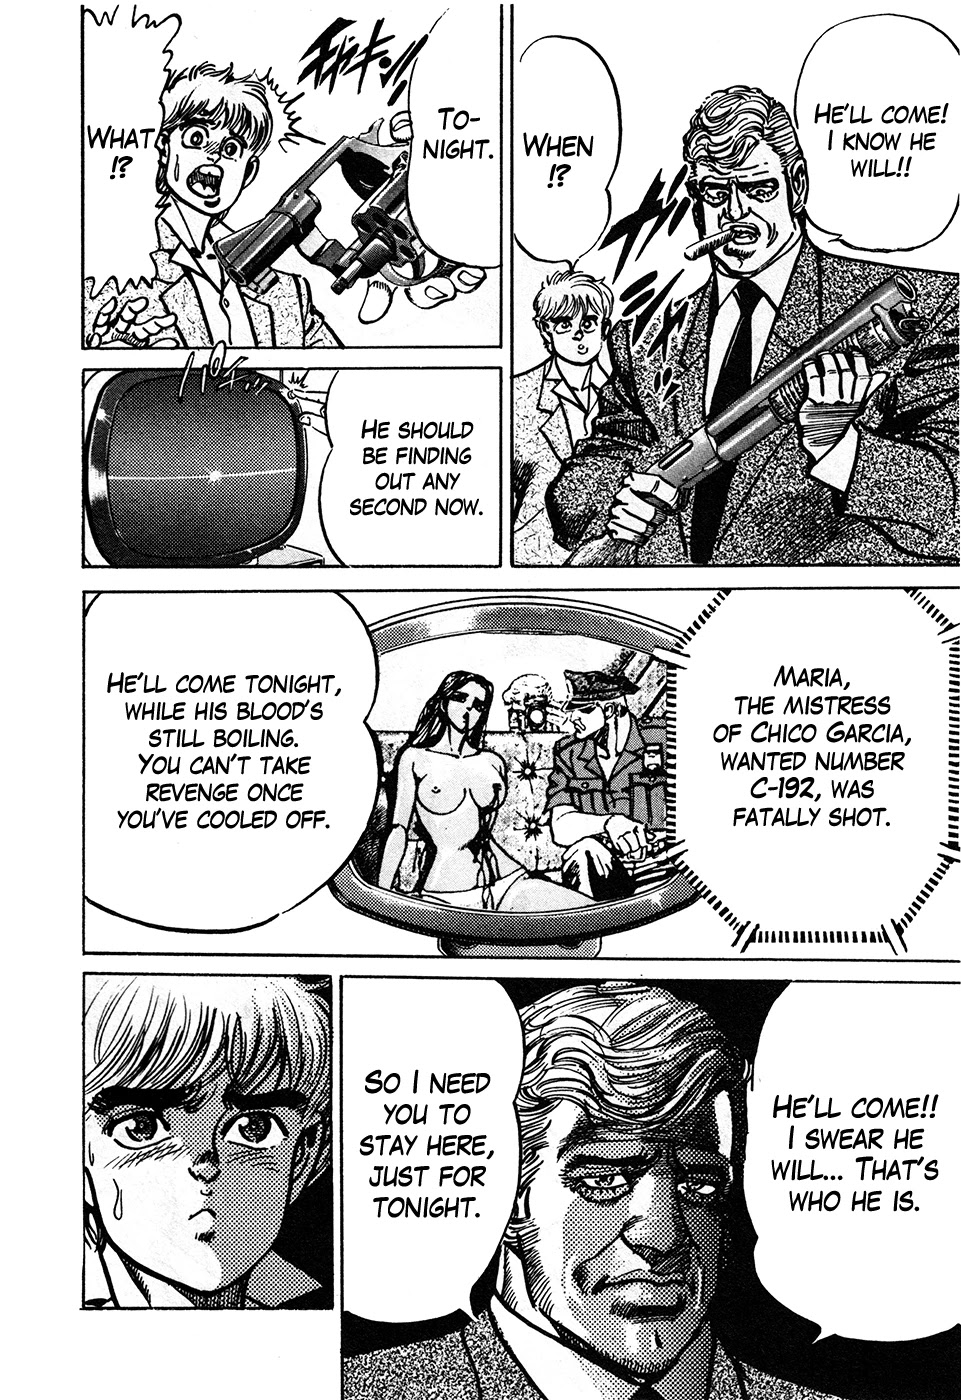 Mad Bull 34 Chapter 39.3: Big Chance, Part 2 - Picture 1